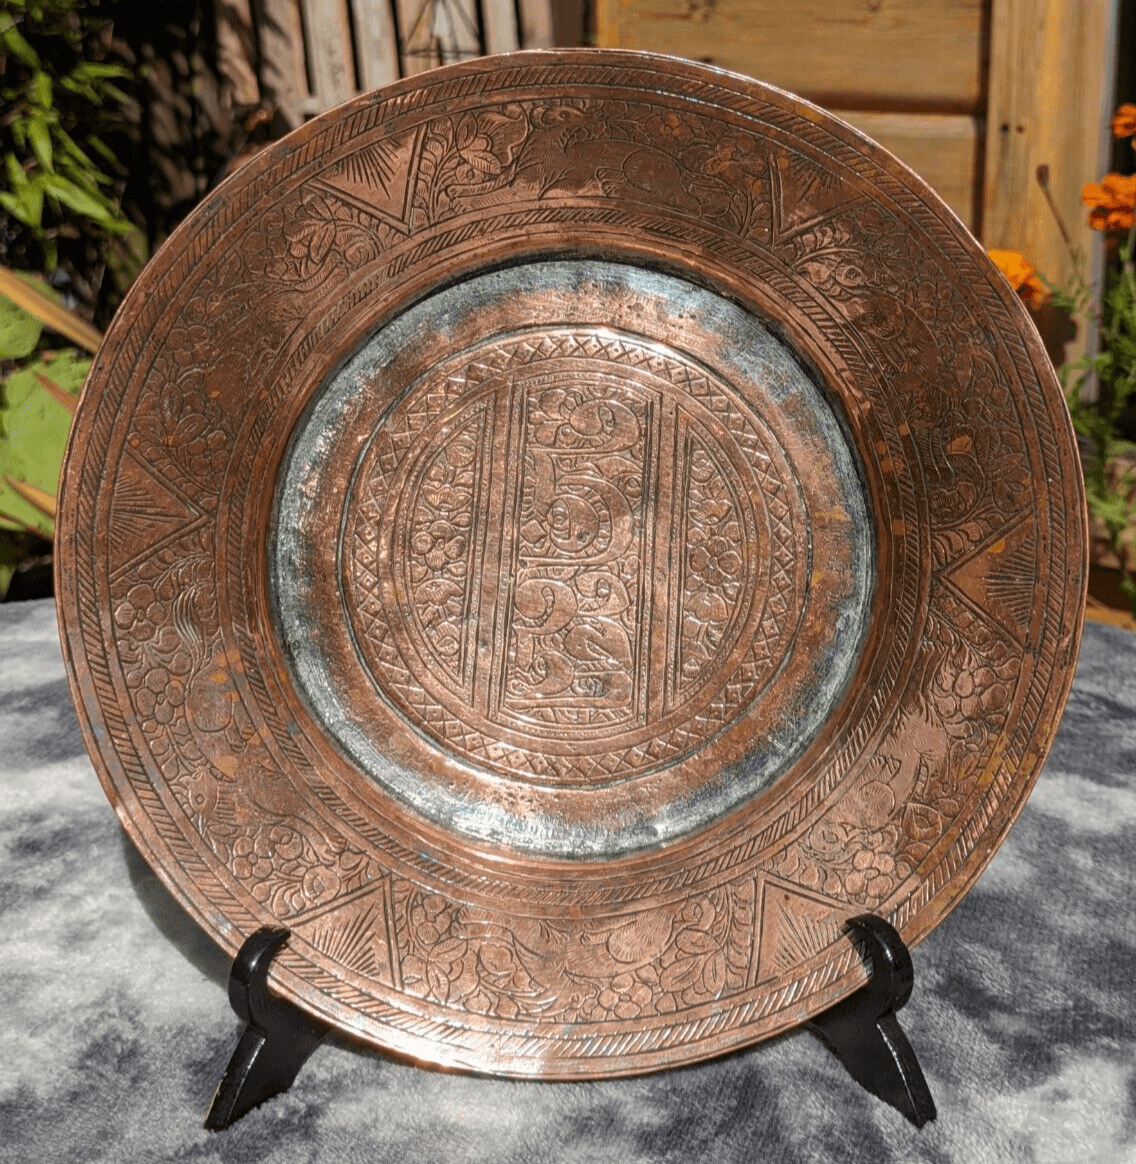 Antique Islamic Ottoman Tinned Copper Dish Engraved Calligraphy Script Animals - Tommy's Treasure